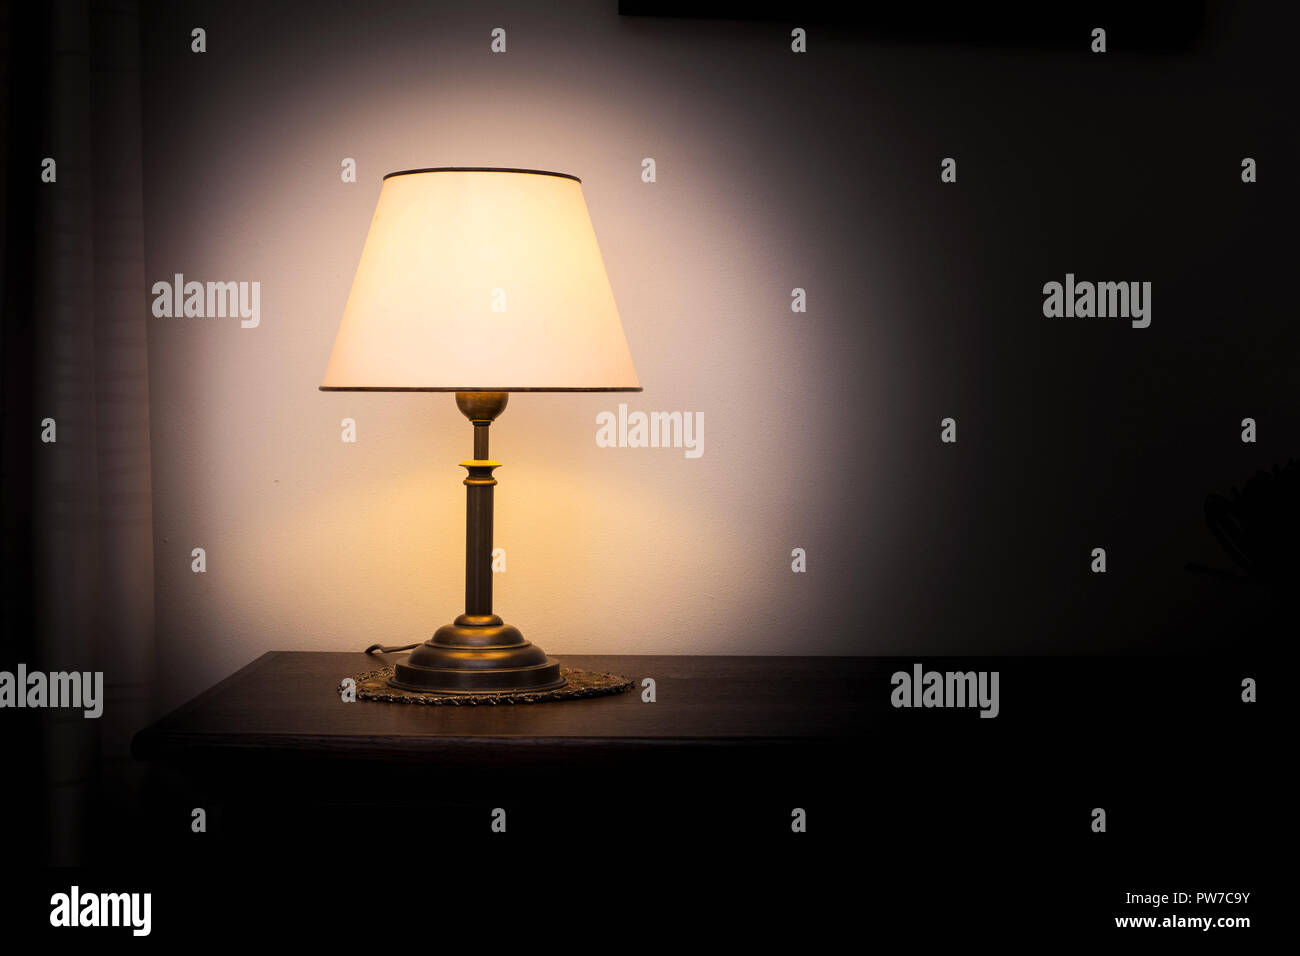 Lamp night light in a dark background. Vintage effect style picture.  Minimal concept Stock Photo - Alamy